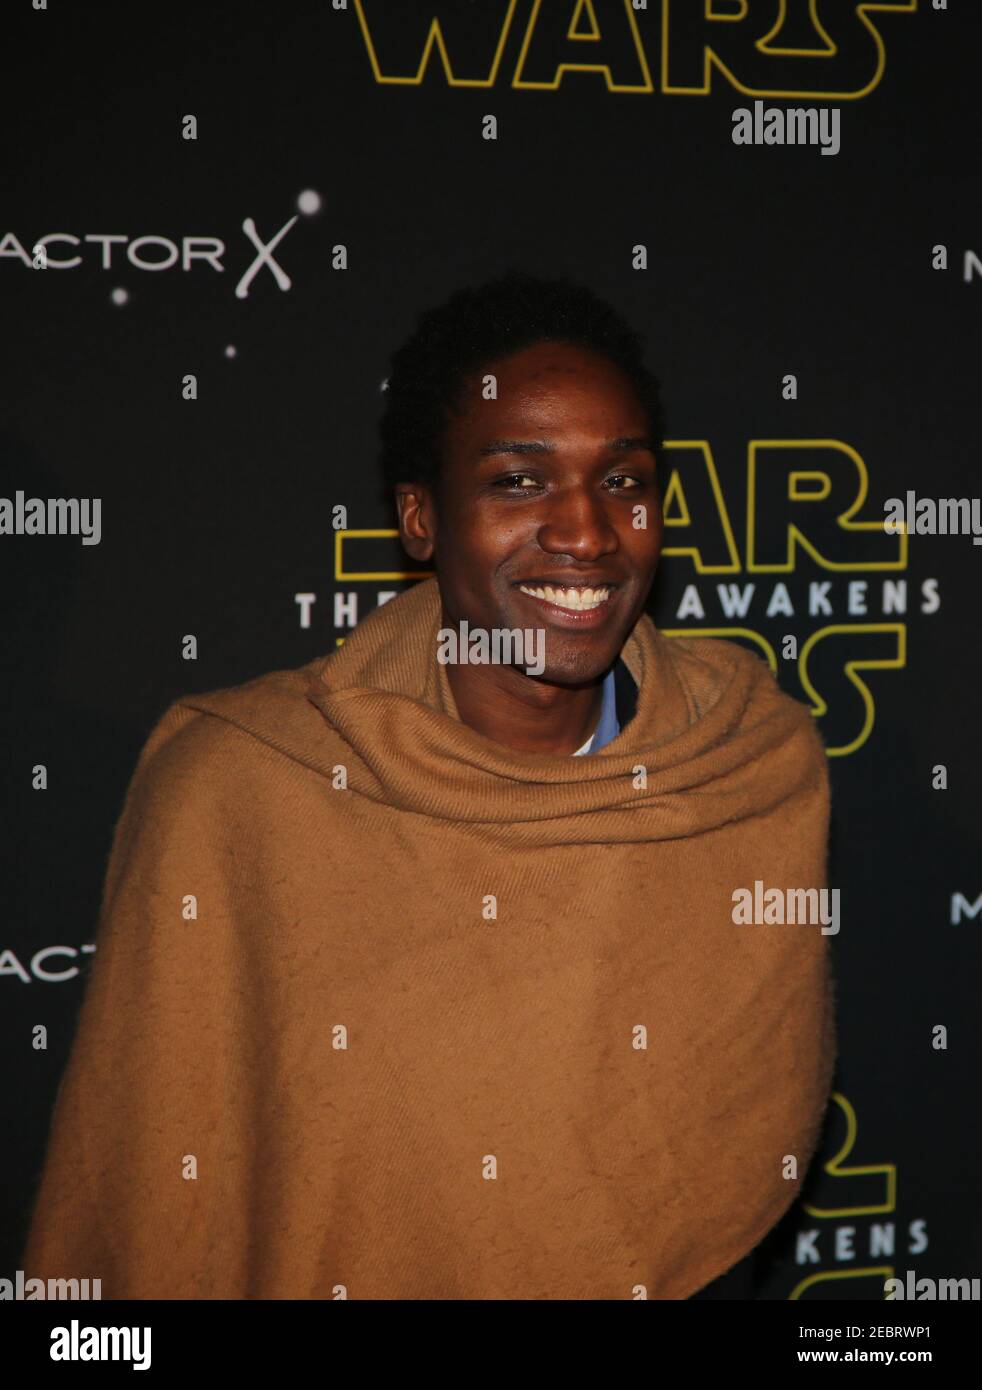 Designer Agi Mdumulla arrives at the Star Wars: Fashion Finds The Force presentation at the Old Selfridges Hotel, London. Ten London-based designers s Stock Photo